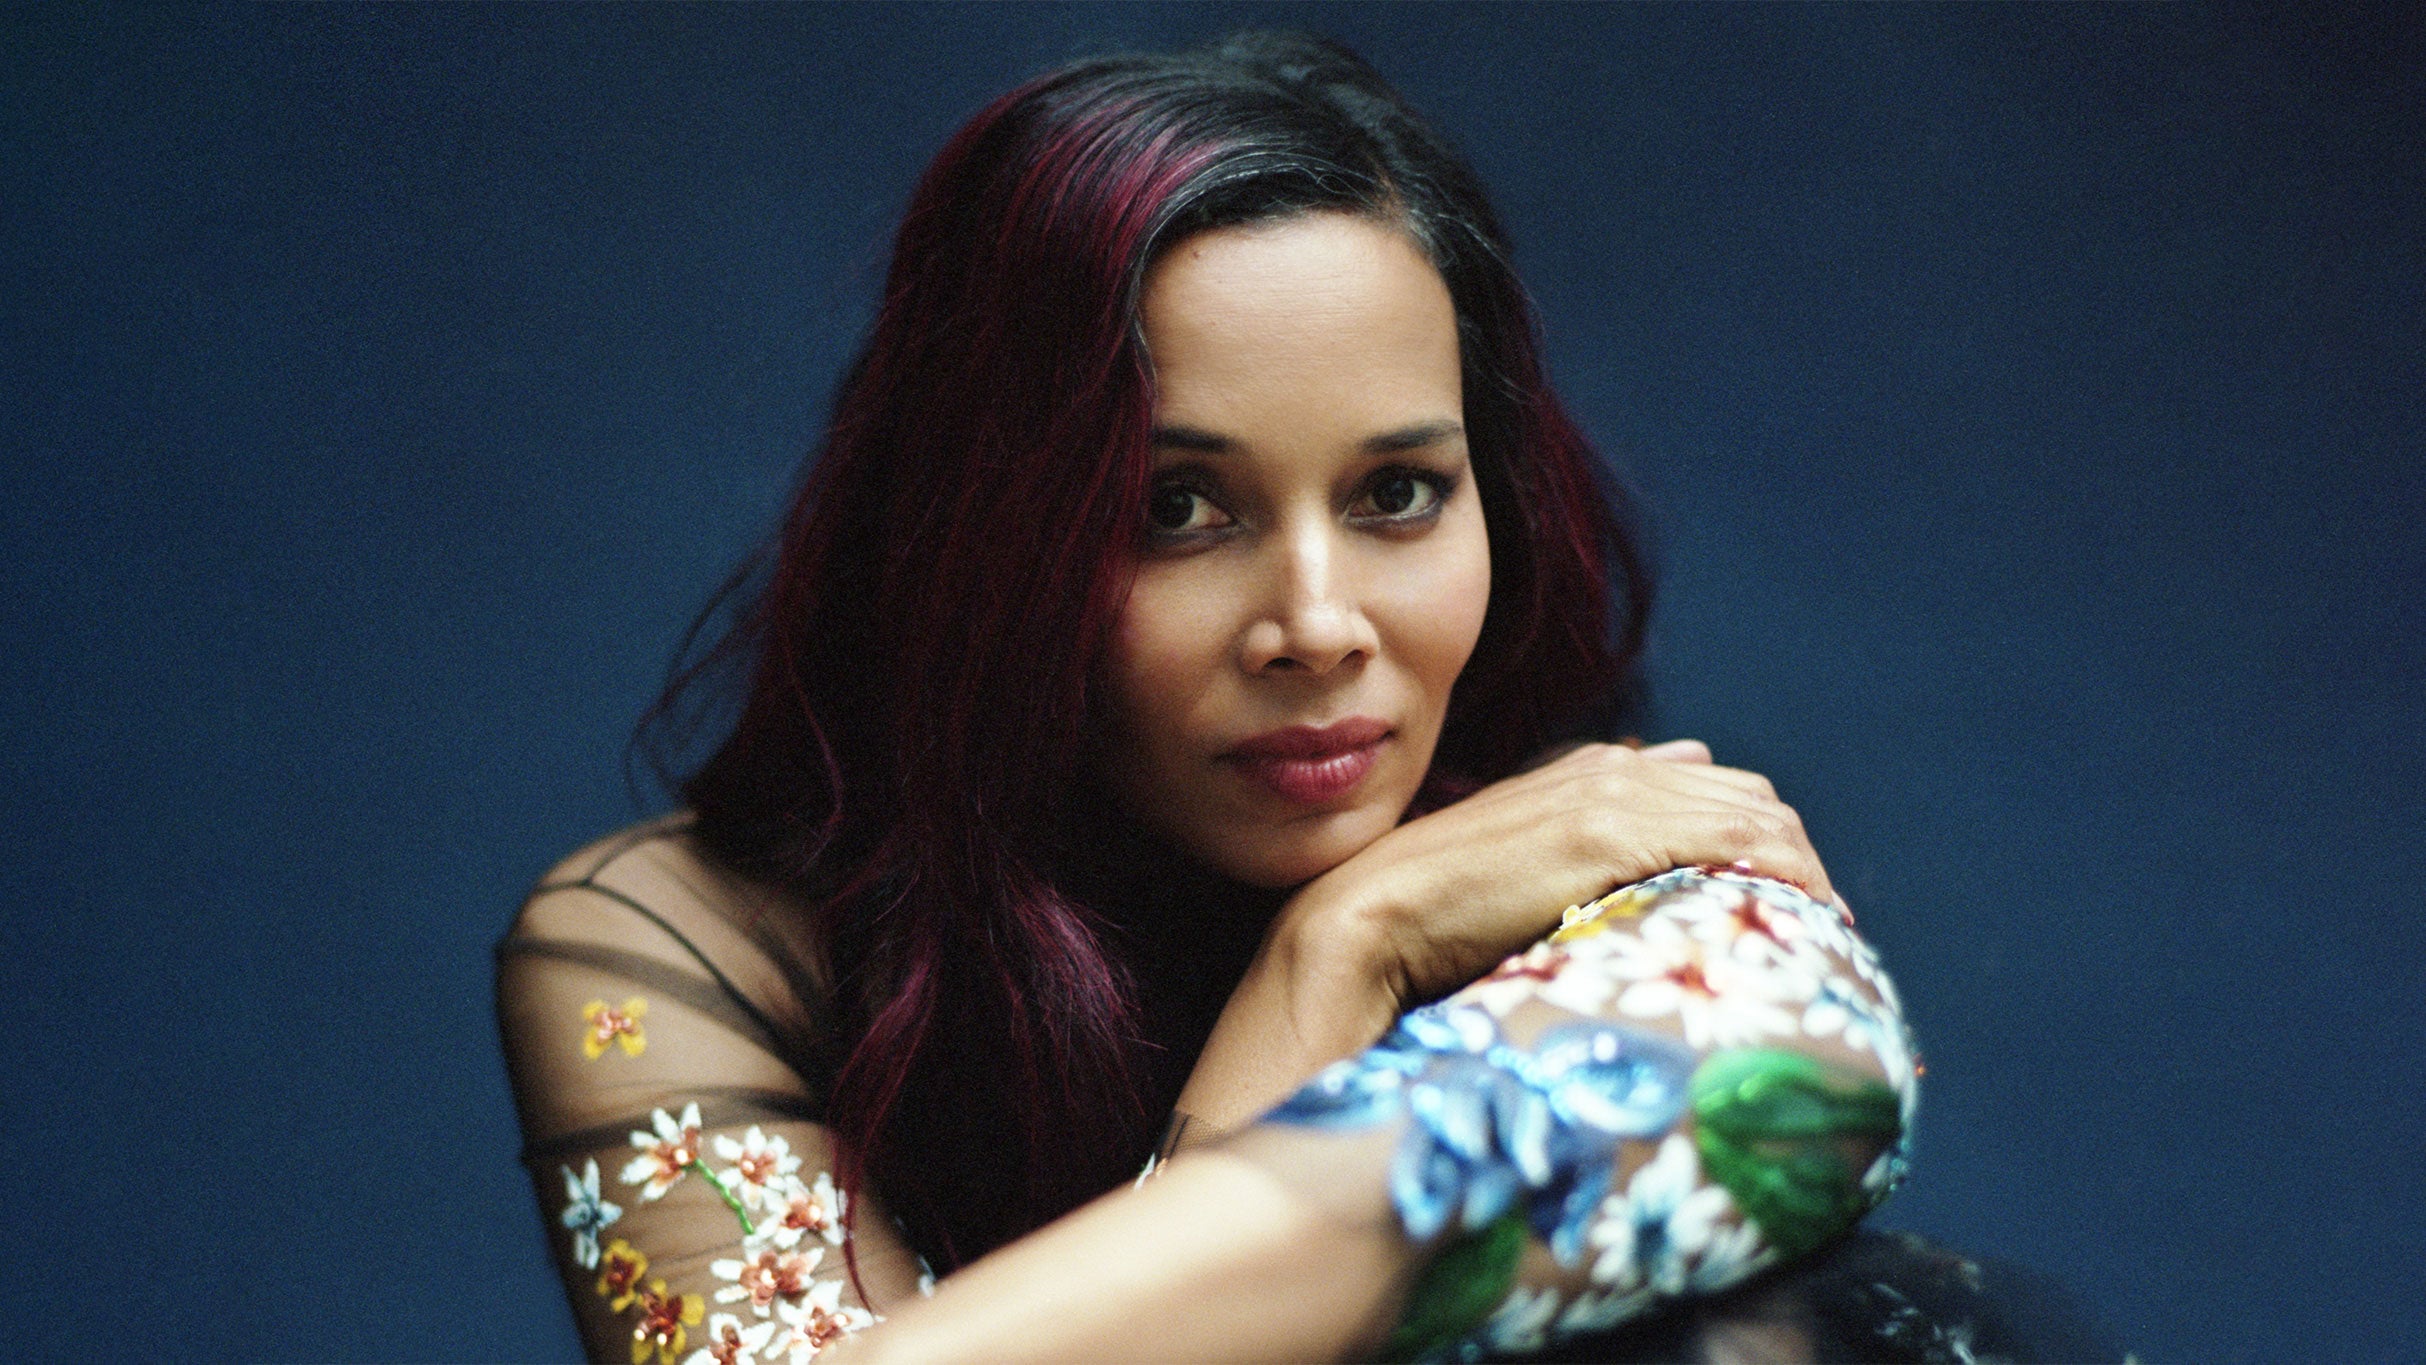 presale password to Rhiannon Giddens face value tickets in New York